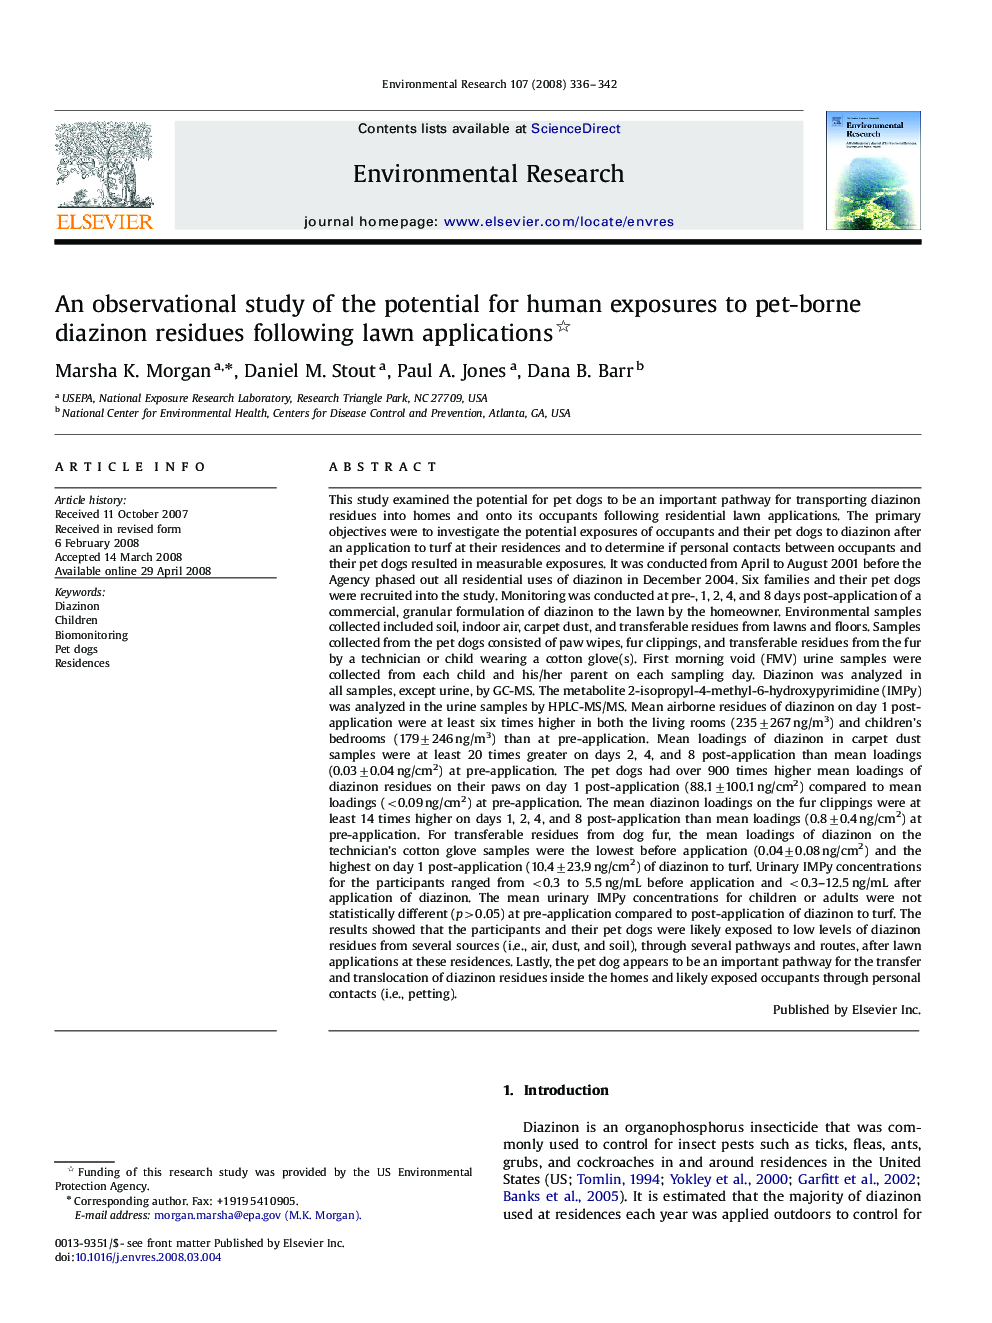 An observational study of the potential for human exposures to pet-borne diazinon residues following lawn applications 